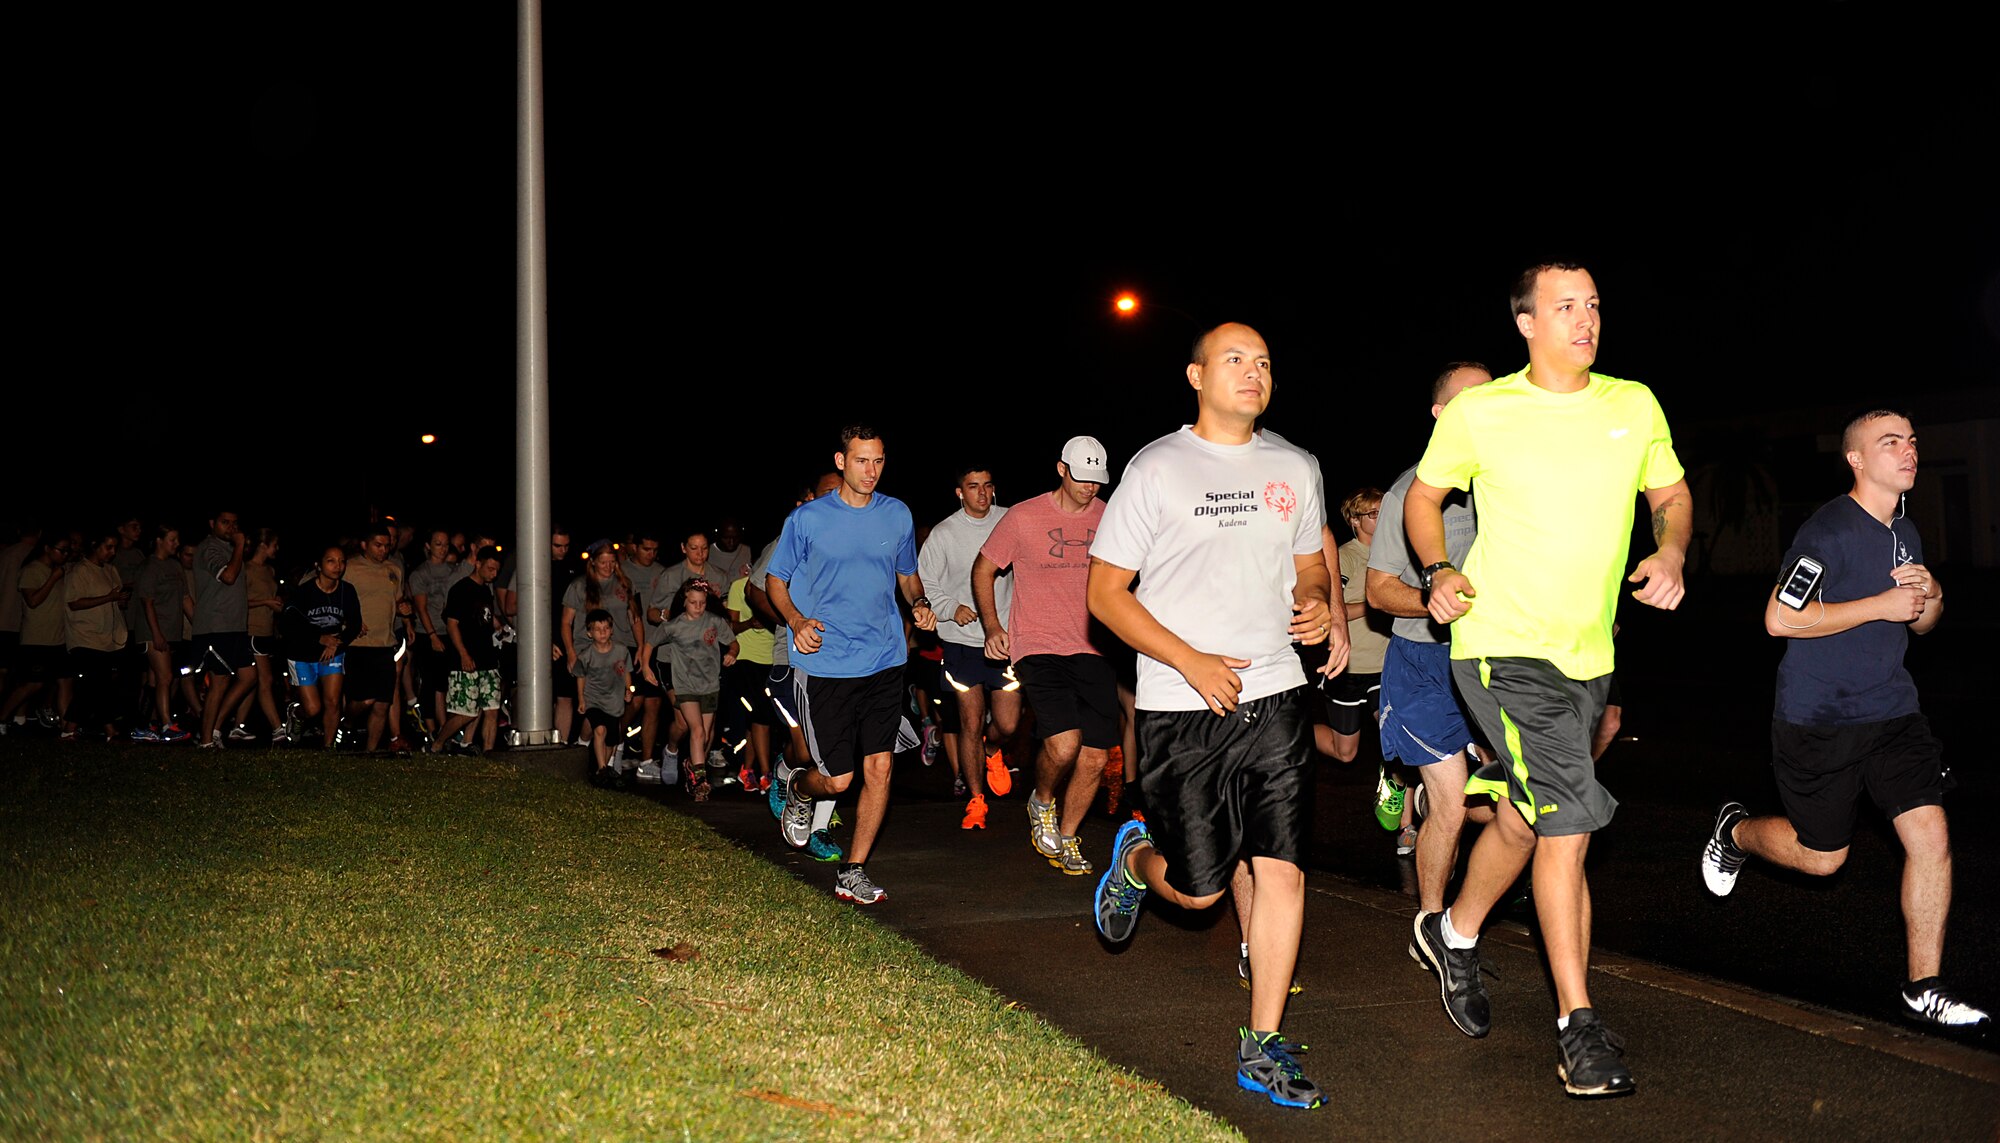 Members of the 353rd Special Operations Group and other participants run in support of the Kadena Special Olympics on Kadena Air Base, Japan, Oct. 31, 2014. The 353rd Special Operations Group hosted 128 runners and 52 volunteers at the Kadena Special Olympics 5k fun run to raise awareness for the KSO scheduled for Nov. 8. (U.S. Air Force photo by Naoto Anazawa)